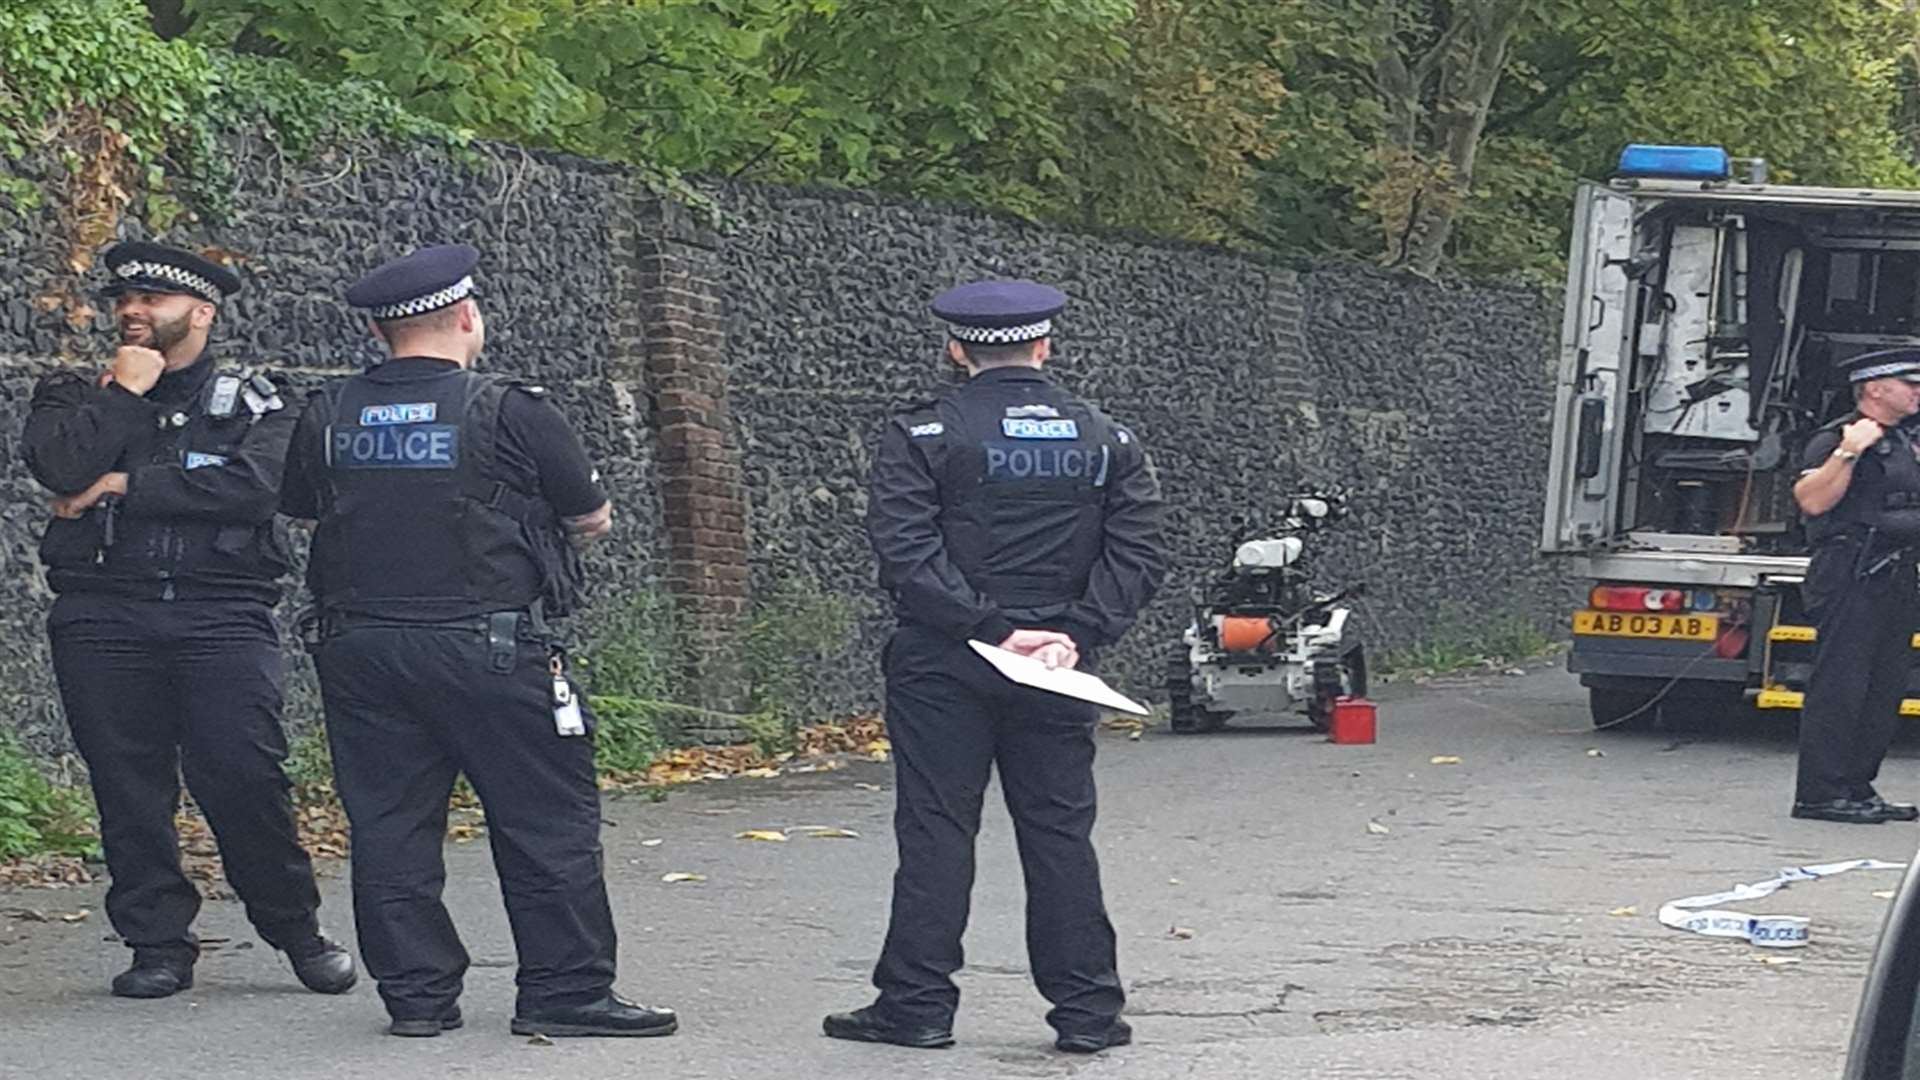 Police at the scene with a specialist robotic device. Photo by David Carnell